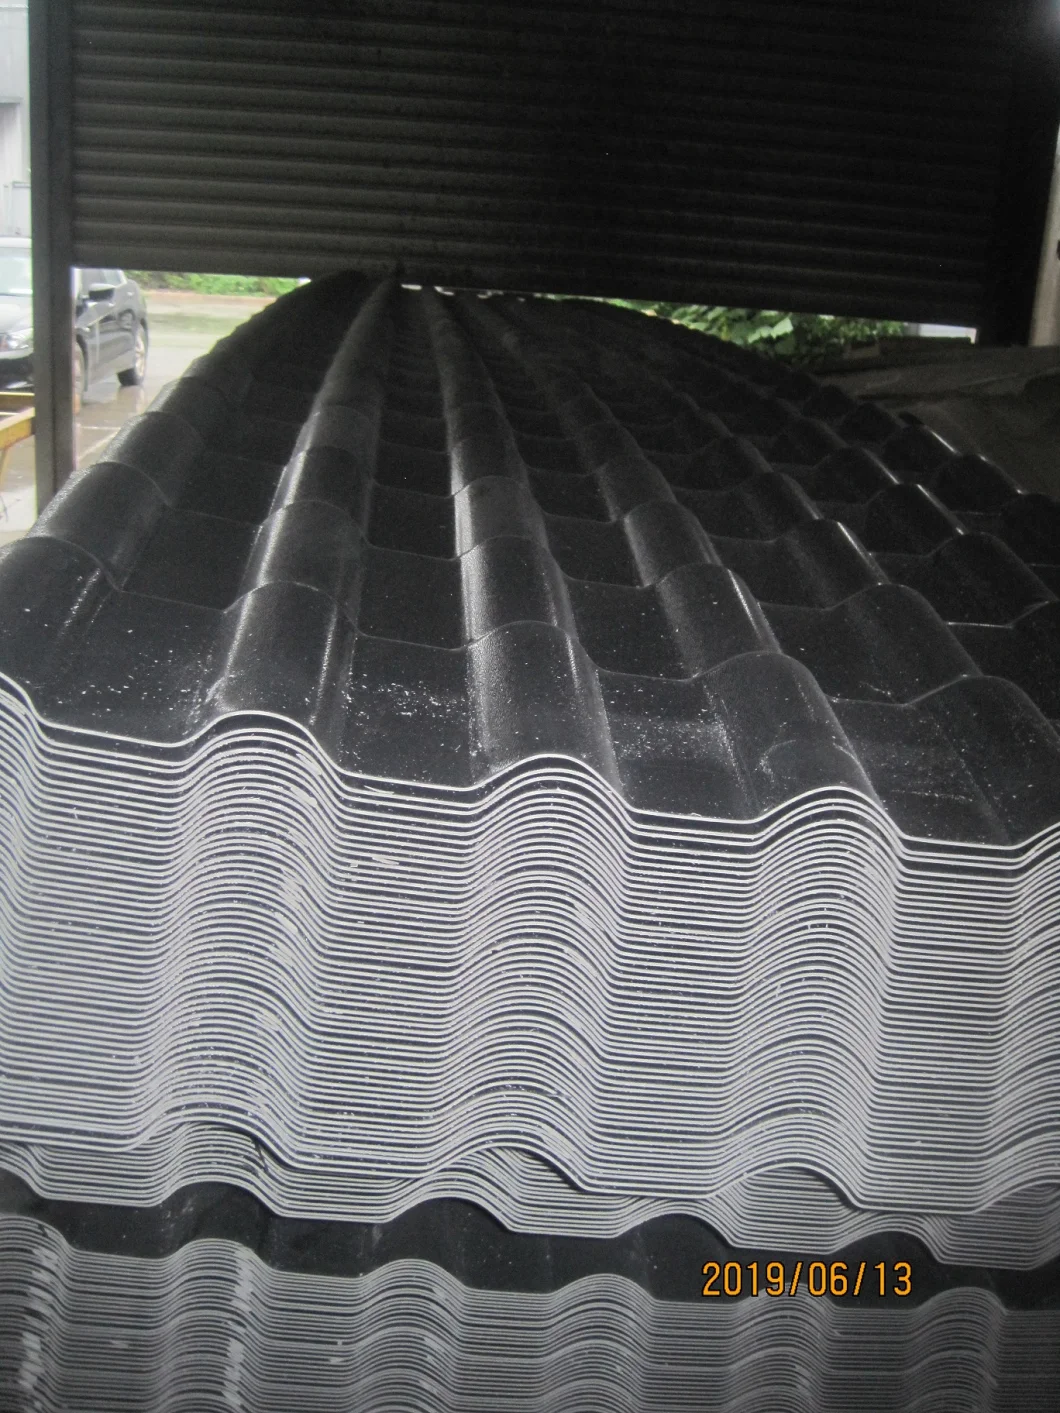 Corrugated PVC Resin Synthetic Roofing Sheet, Interlocking Plastic Resin Roof Tile